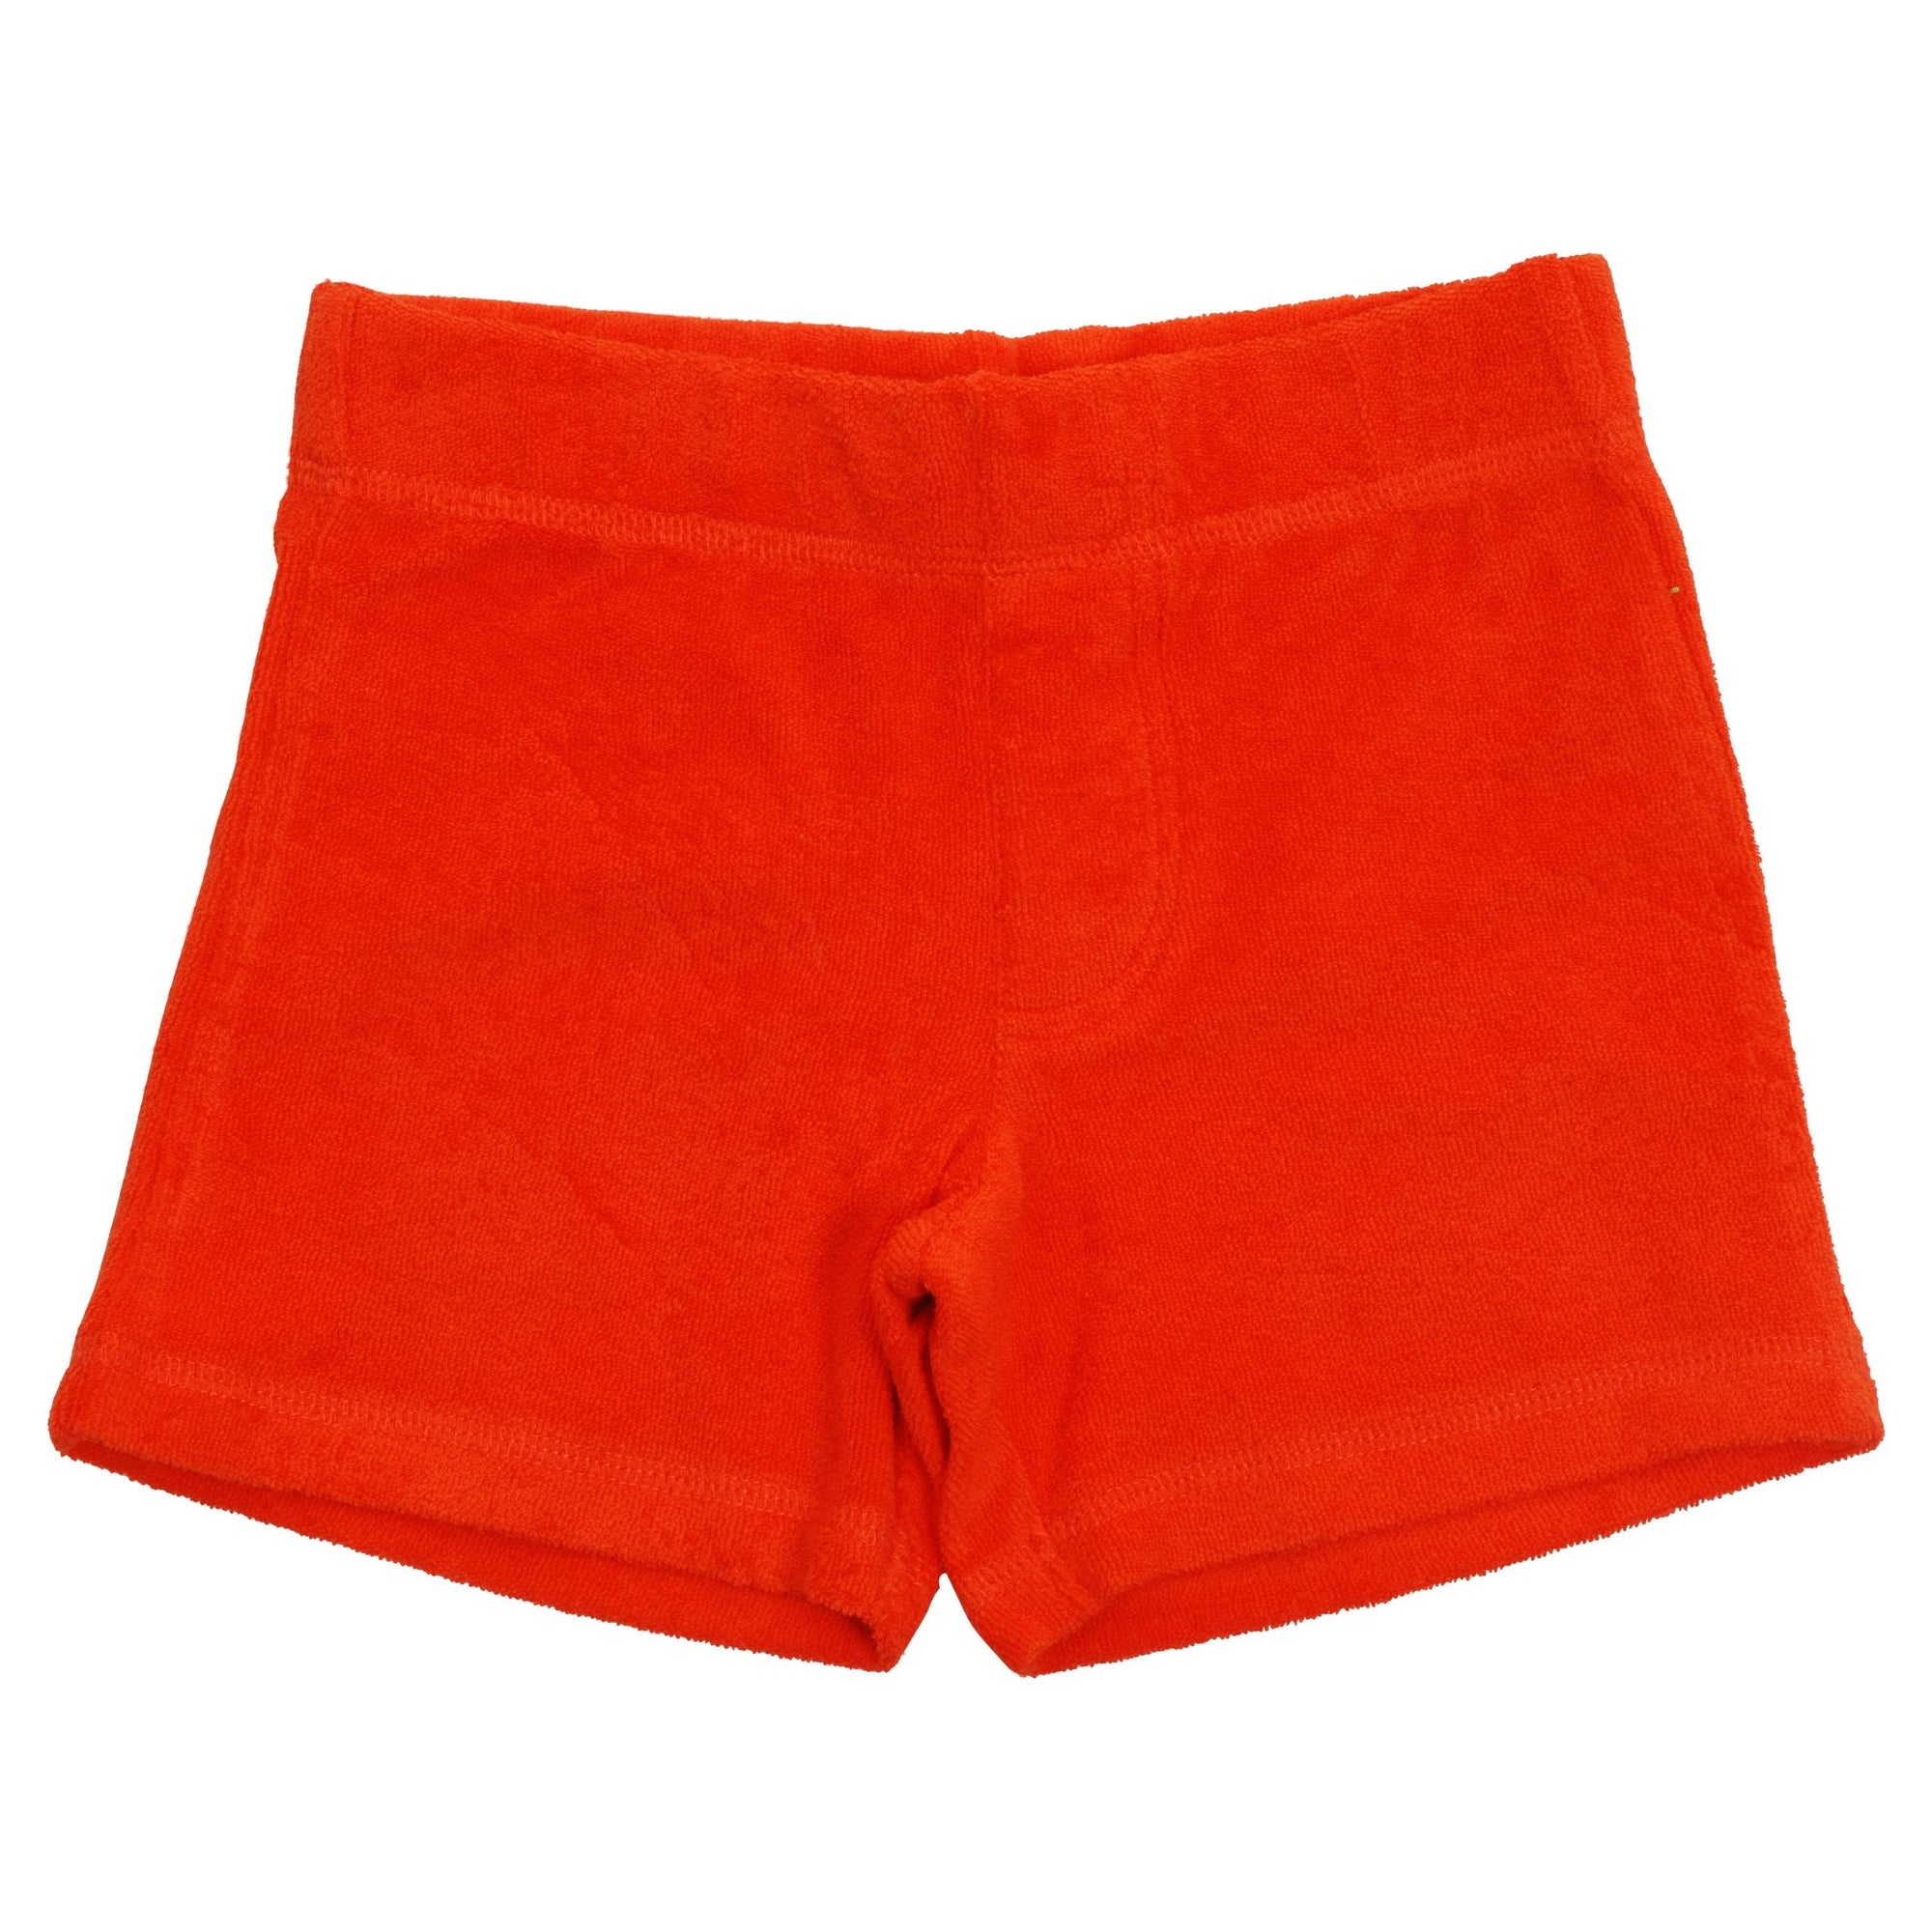 Cherry Tomato Terry Shorts (Orange-Red) - 1 Left Size 12-14 years-Duns Sweden-Modern Rascals